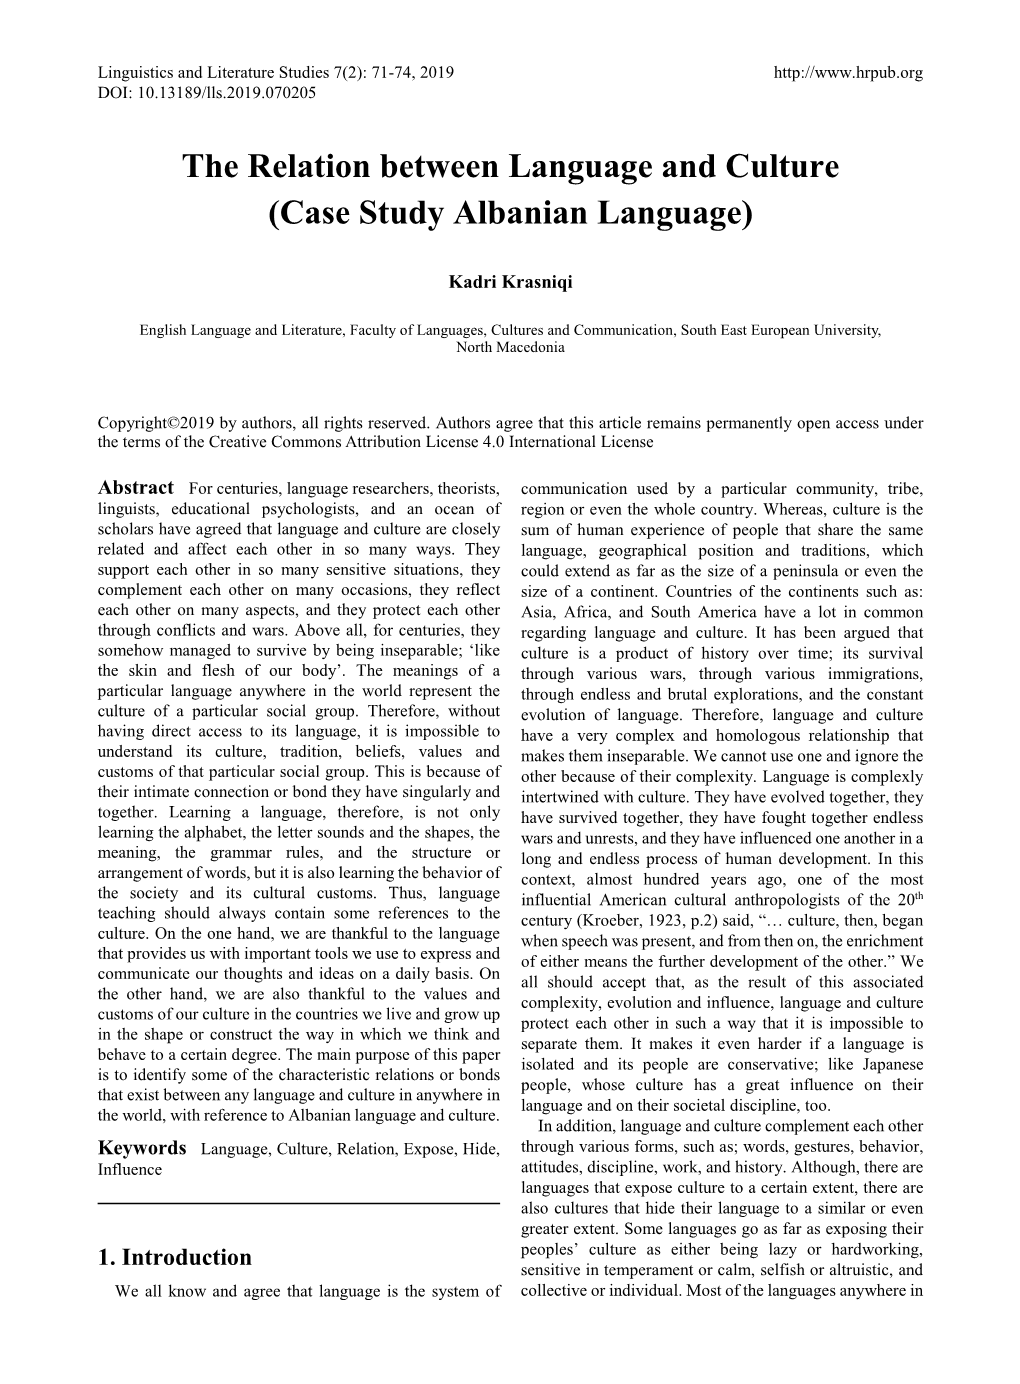 The Relation Between Language and Culture (Case Study Albanian Language)